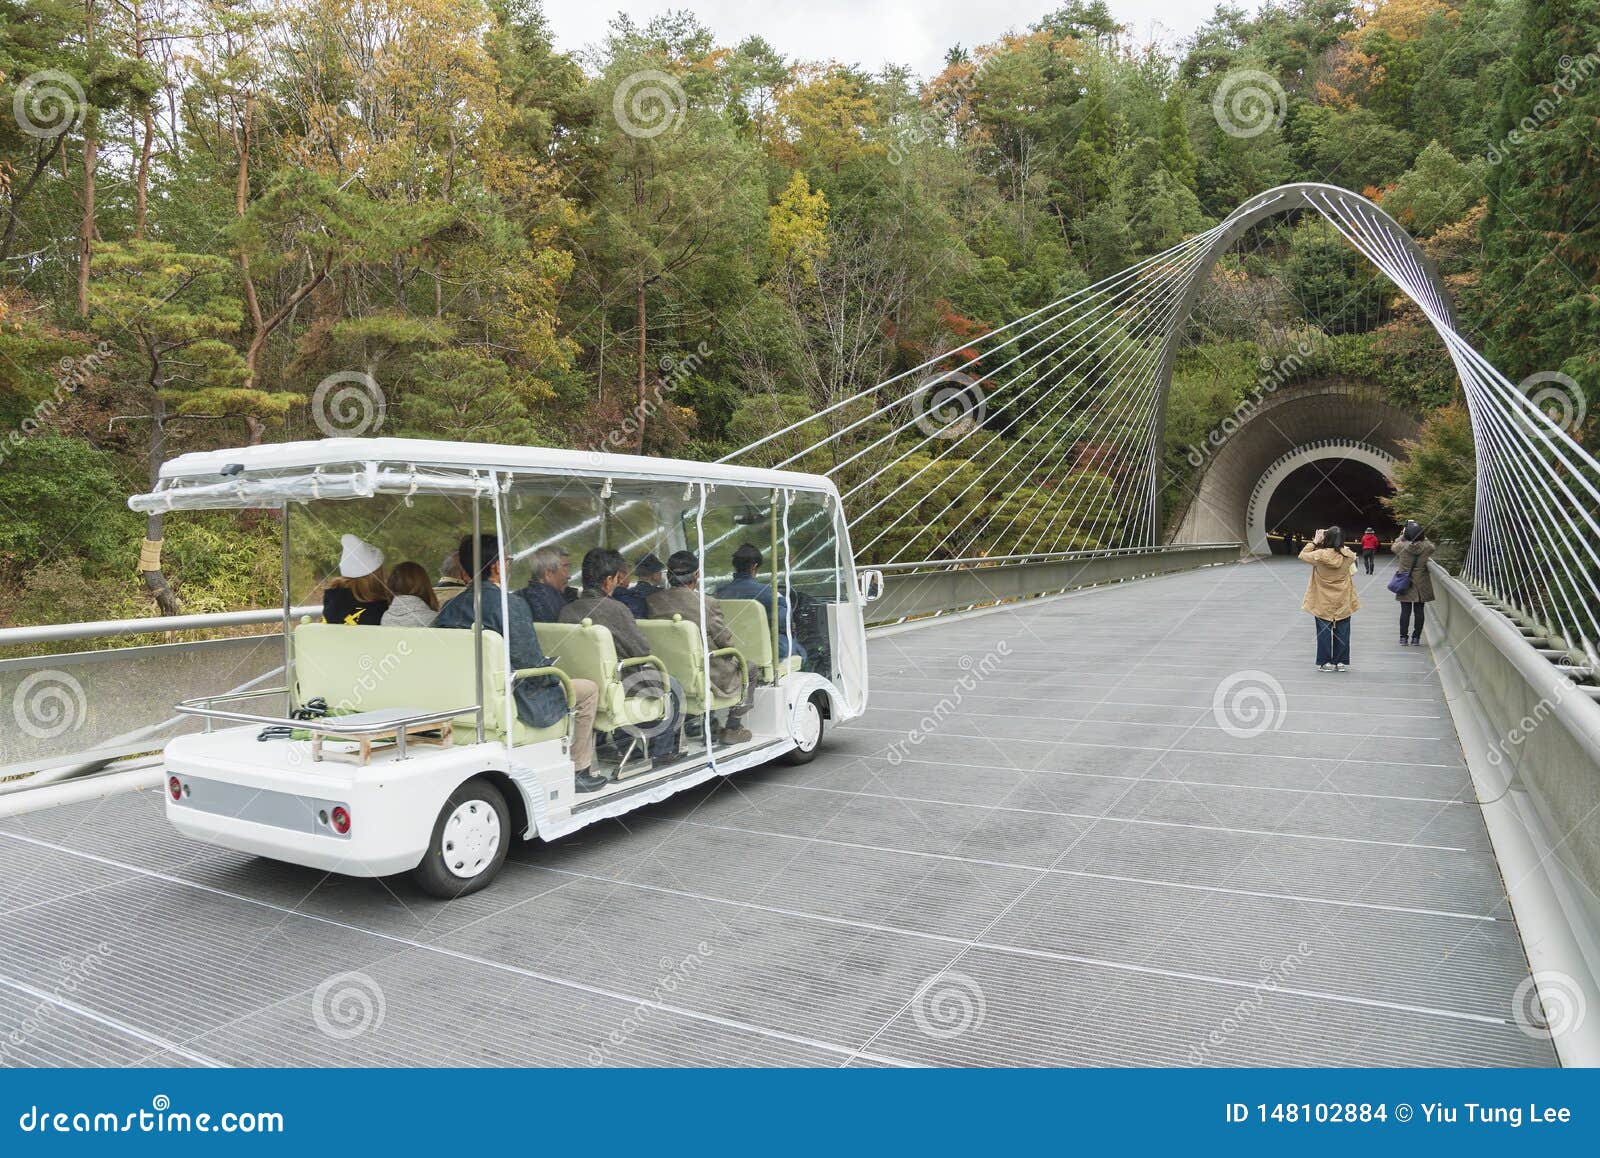 31 Miho Museum Images, Stock Photos, 3D objects, & Vectors